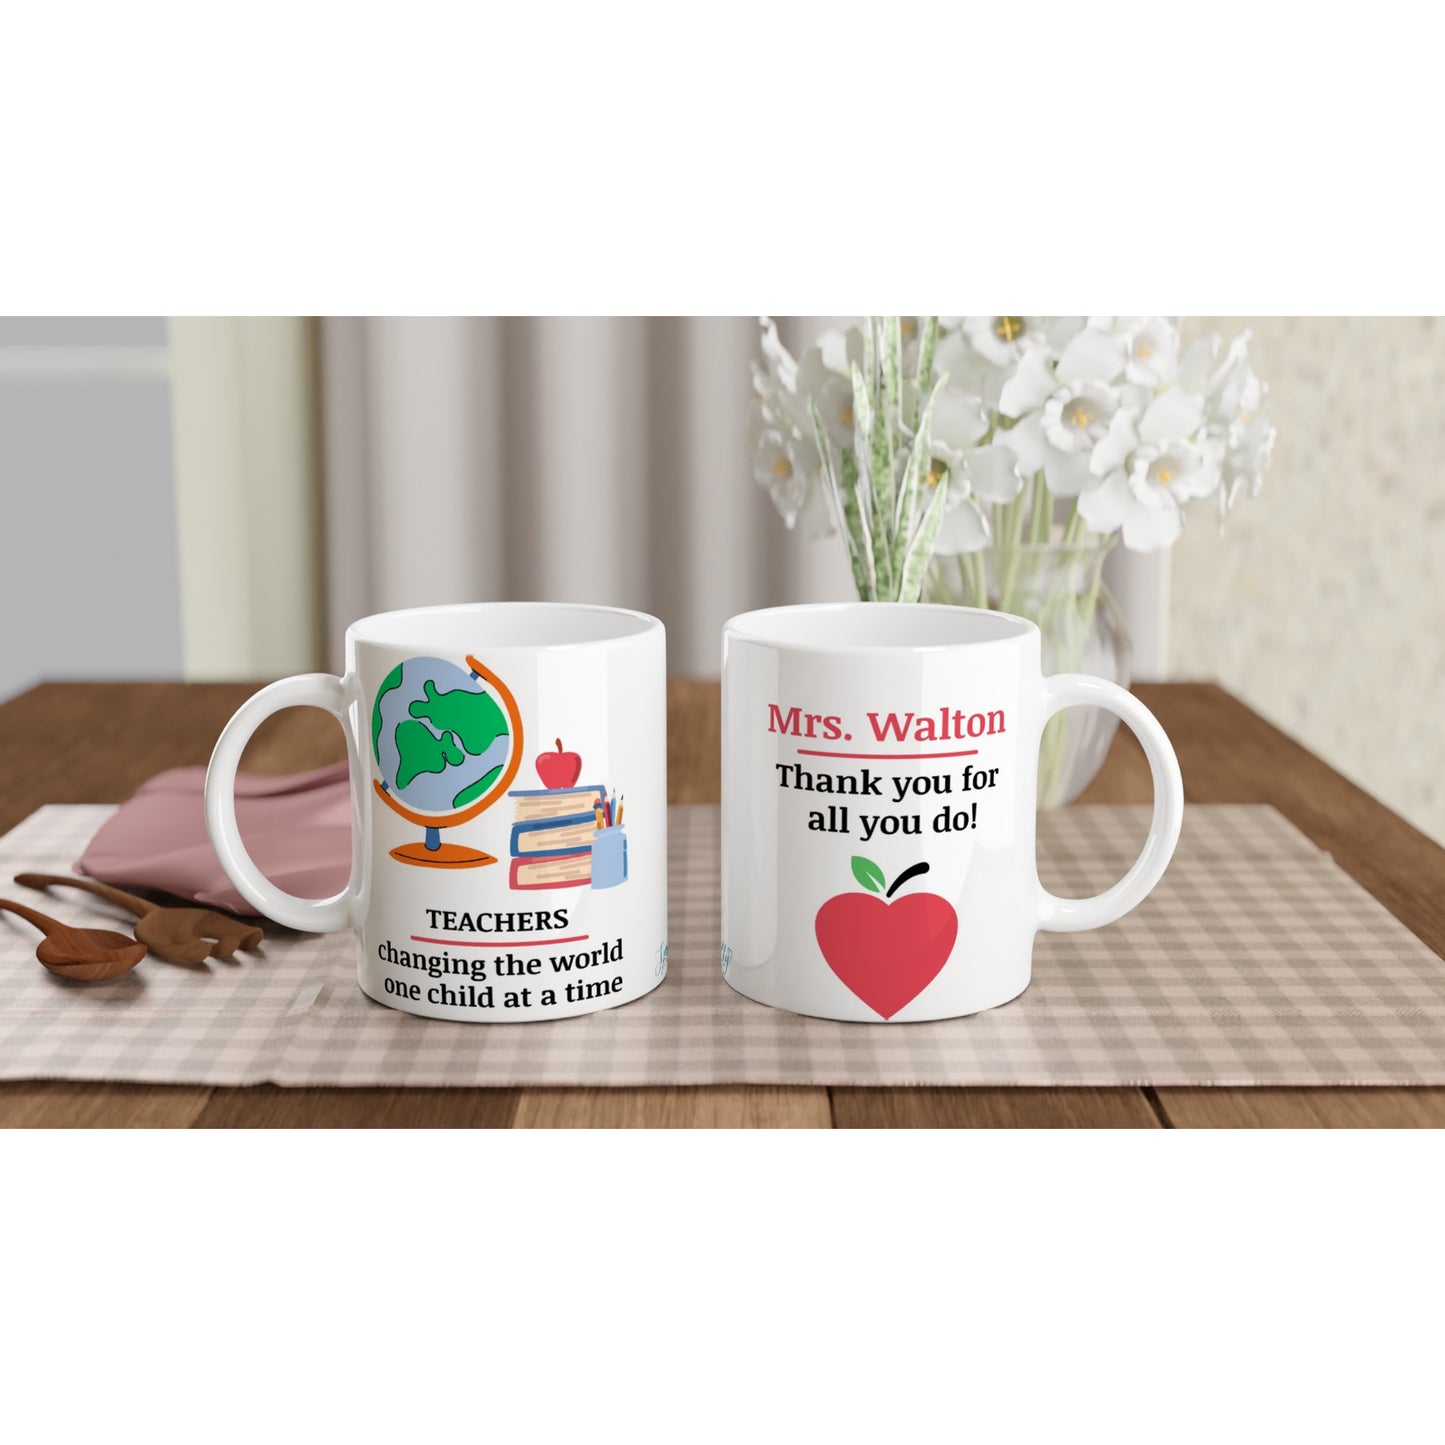 "Teachers: Changing the world one child at a time." Customizable Name Mug front and back view sitting on table